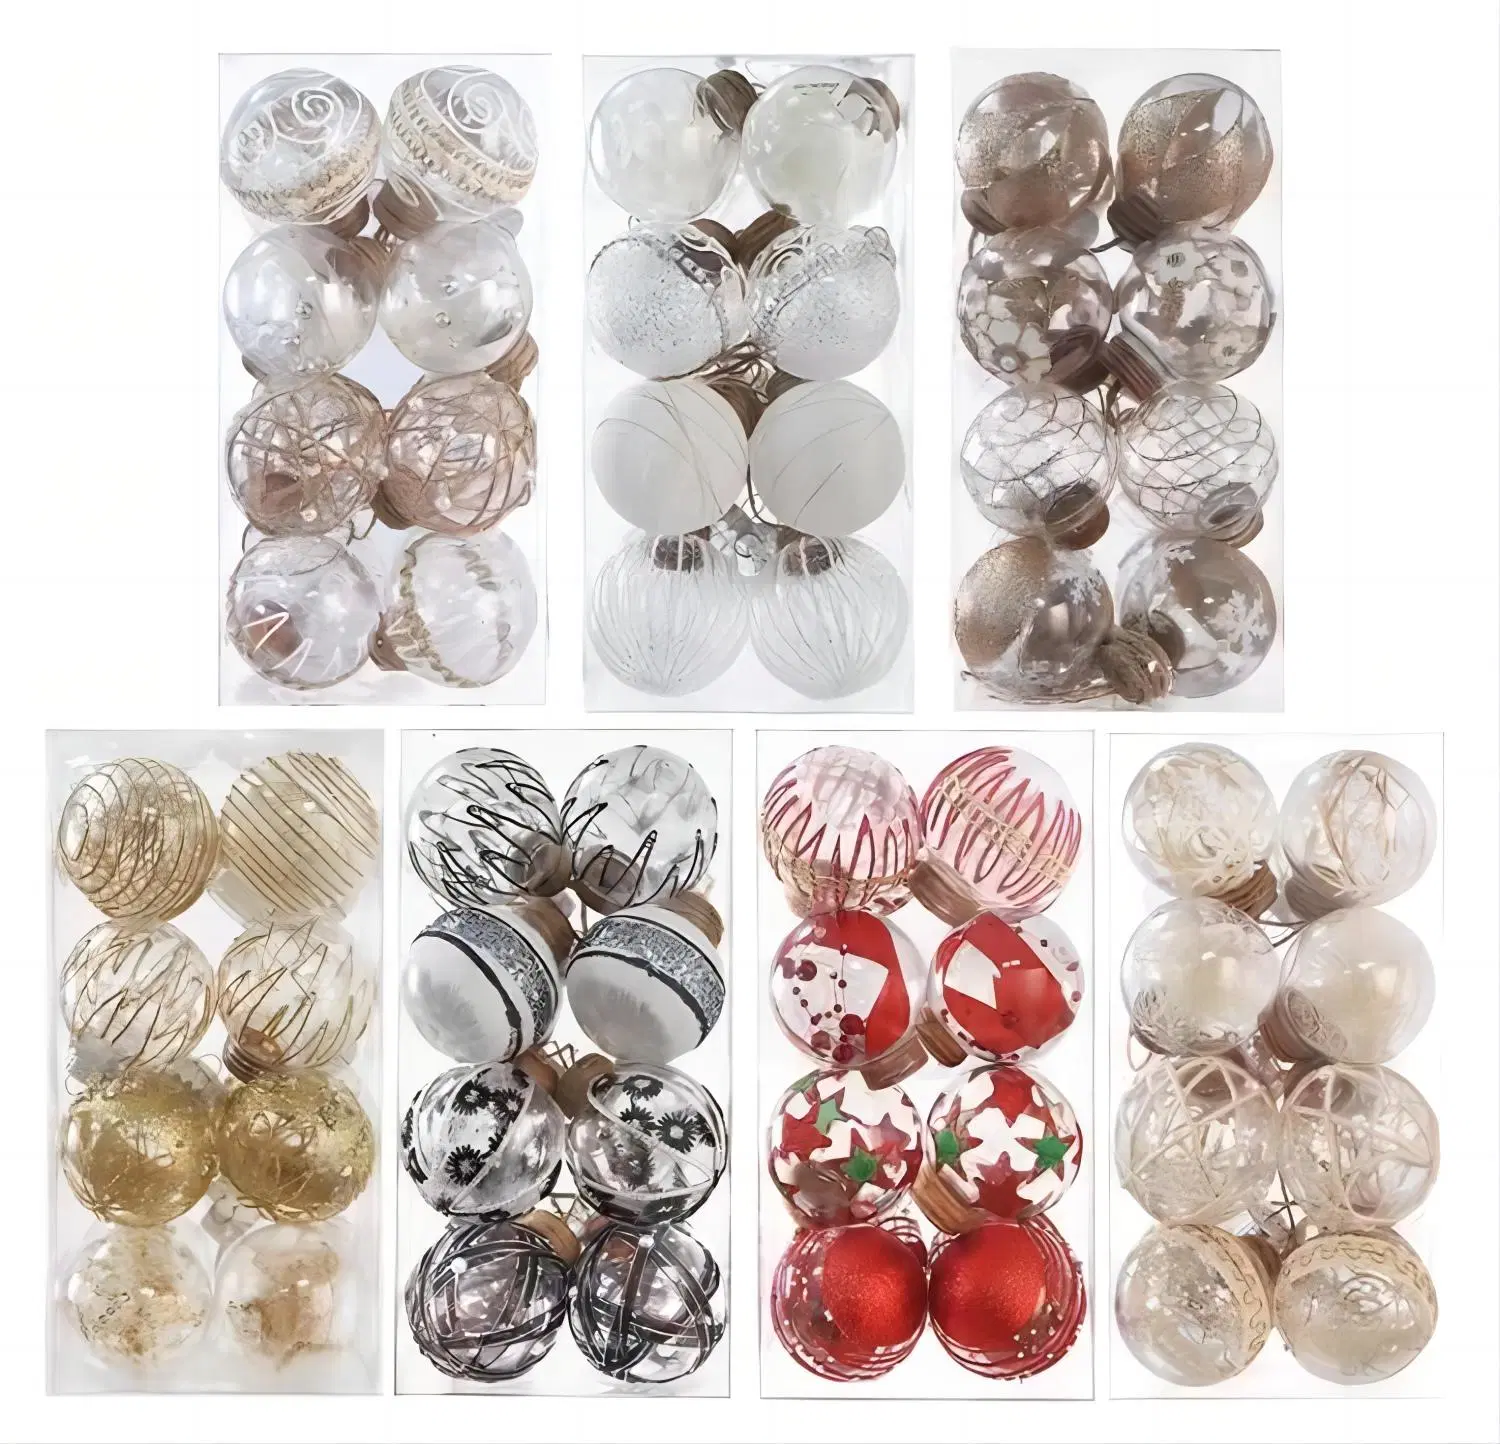 OEM Factory Customized Christmas Ball Ornament Sets Christmas Ball Ornament Crafts Christmas Ball Products Christmas Clear Balls Manufacturer in China